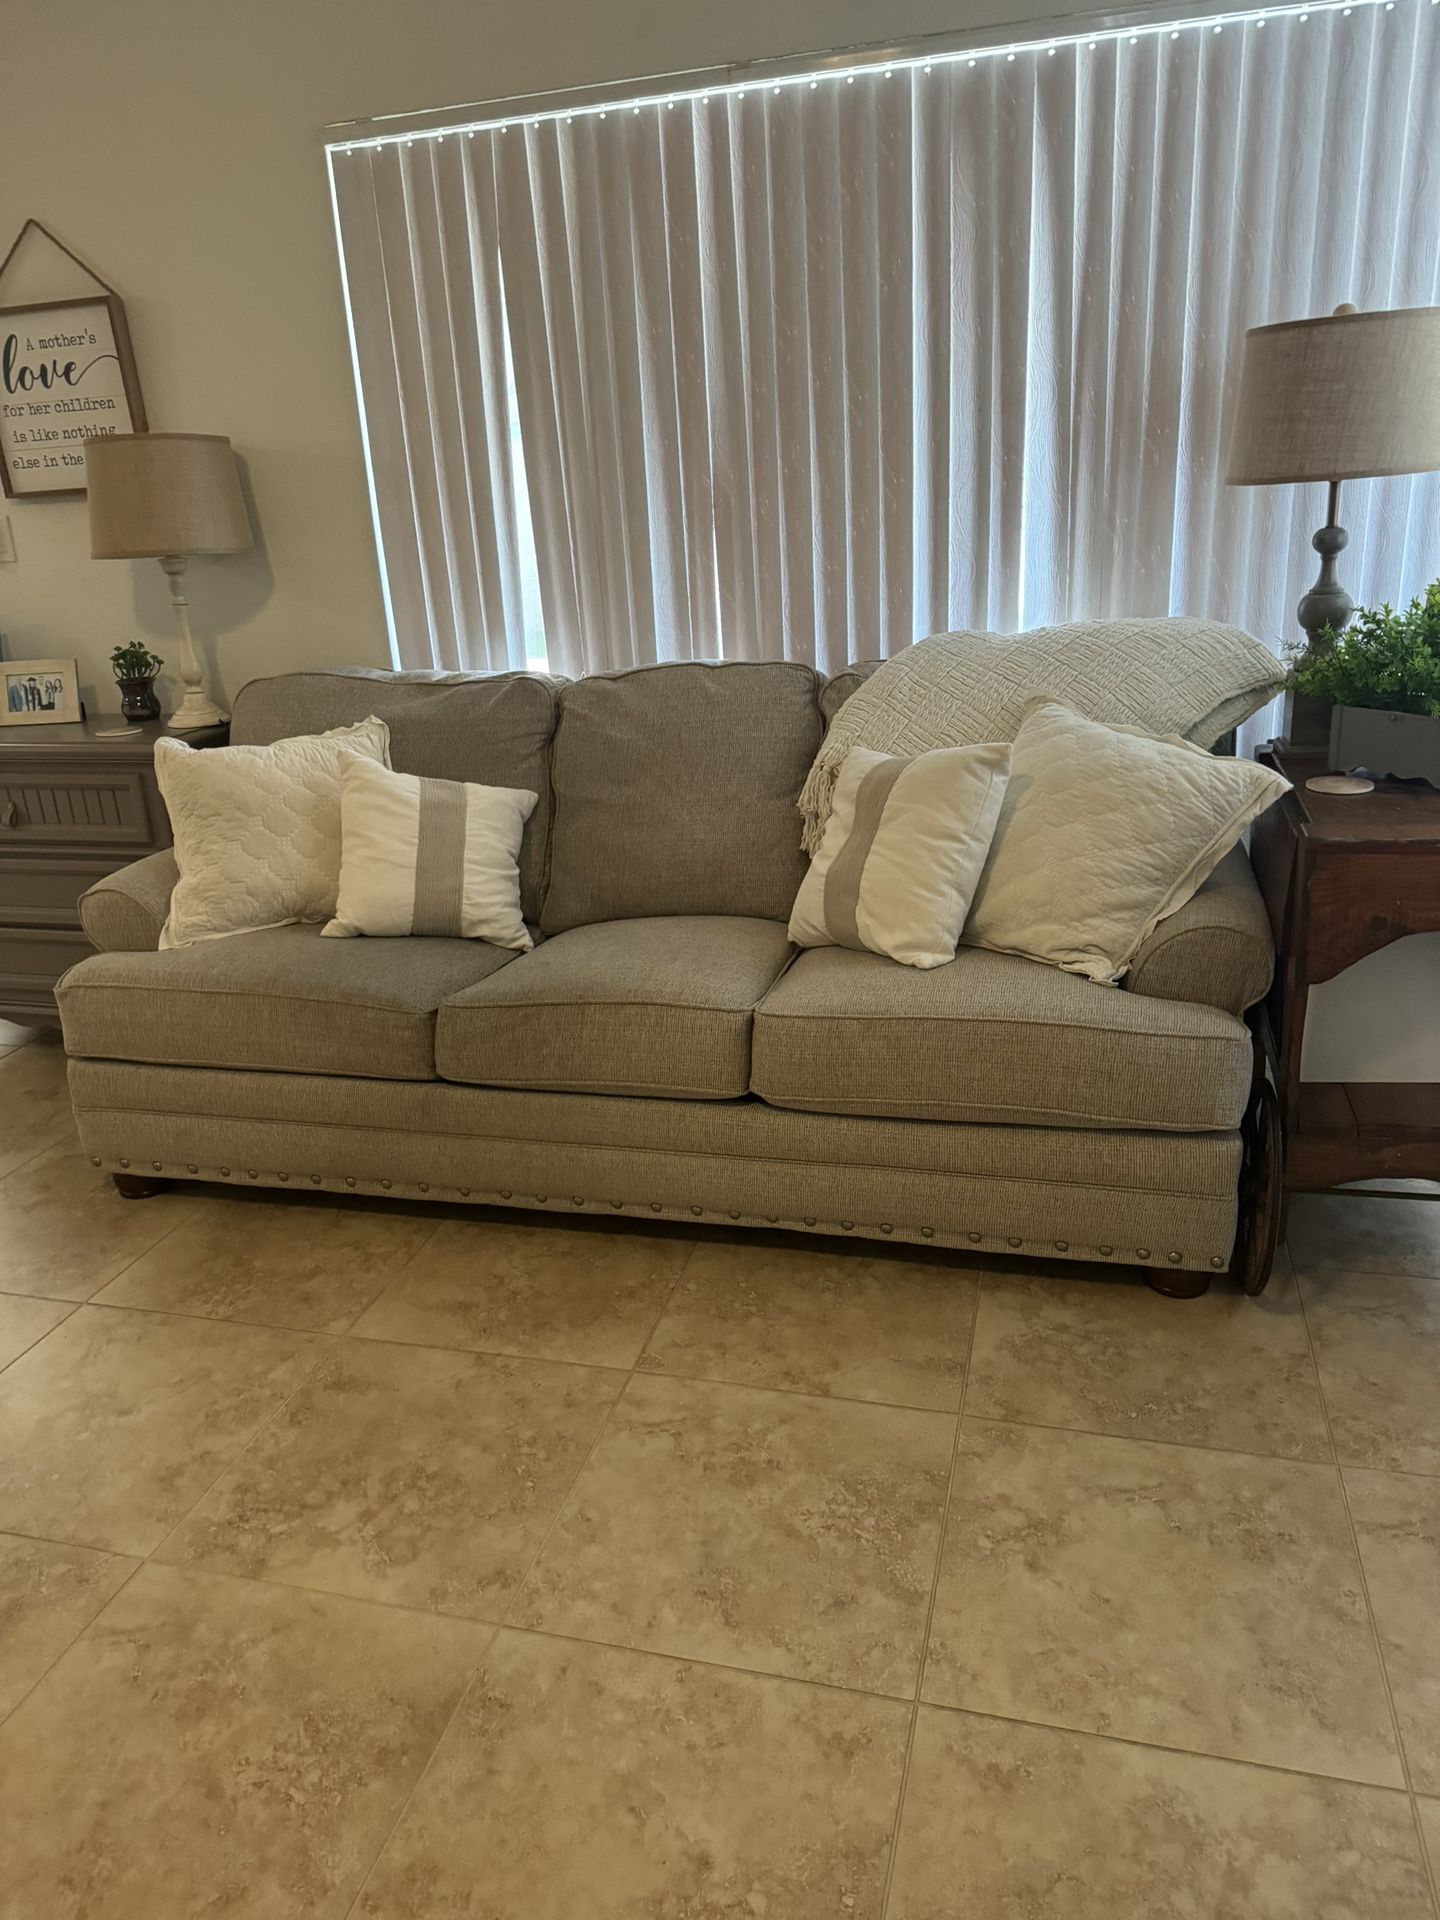 Grey/beige Sofa / Couch 